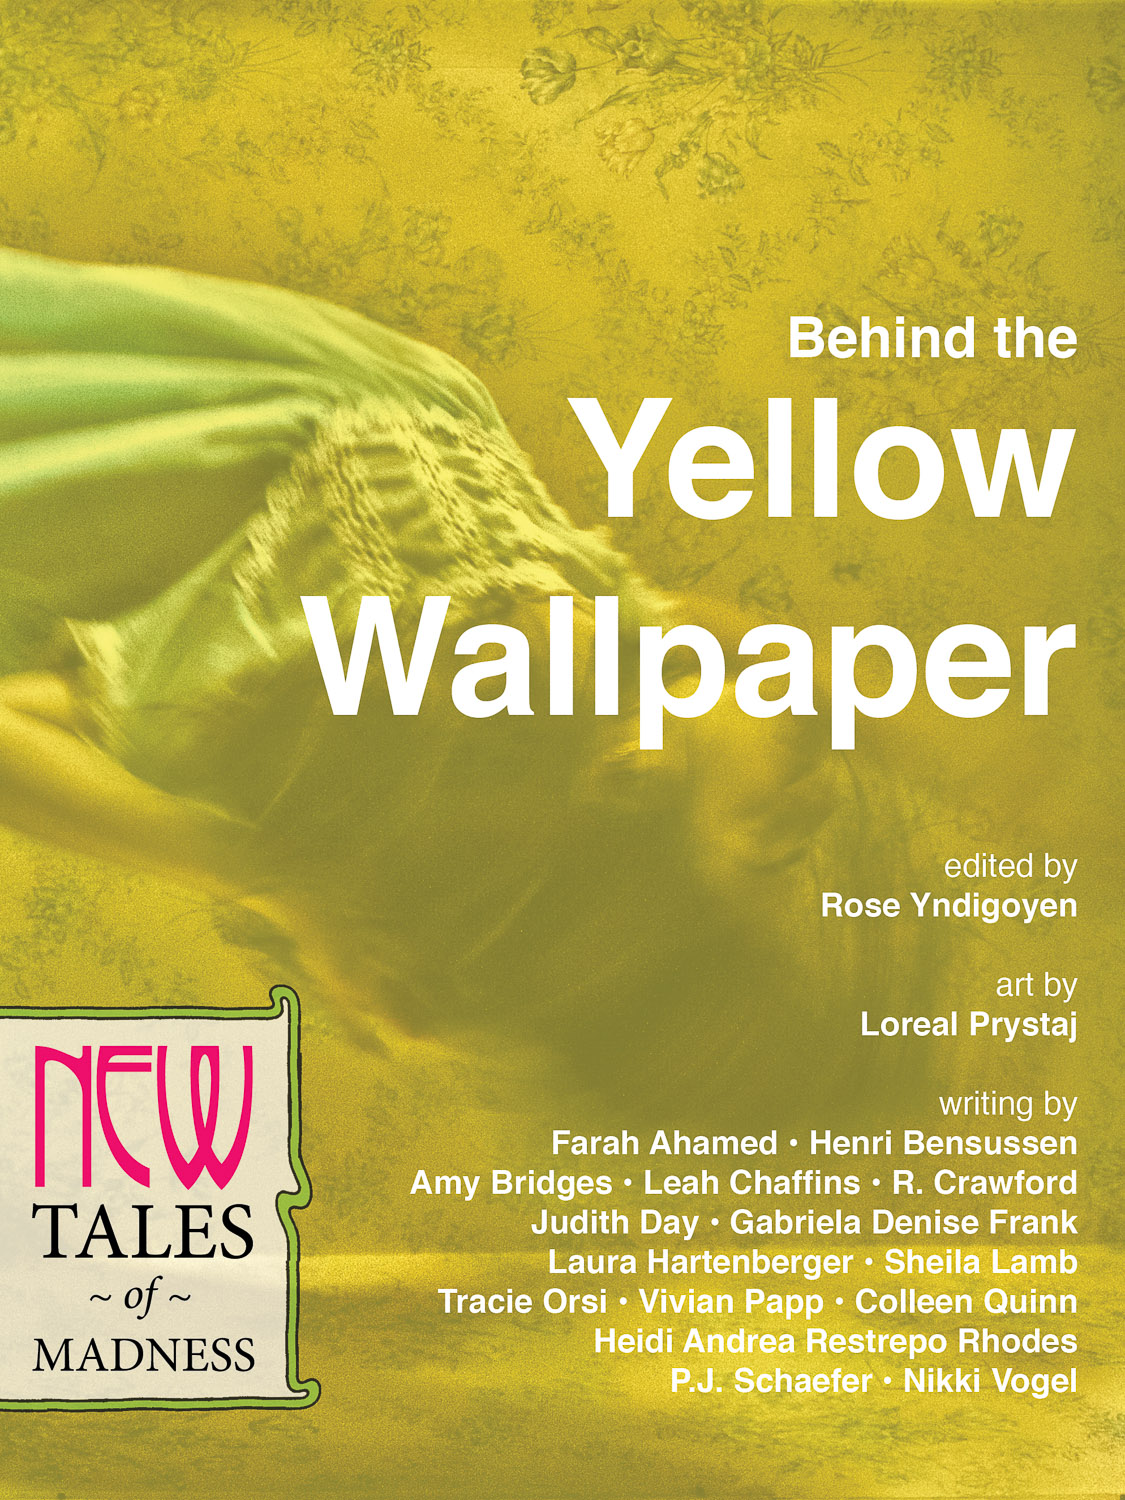 Behind The Yellow Wallpaper New Tales Of Madness Lit Salon